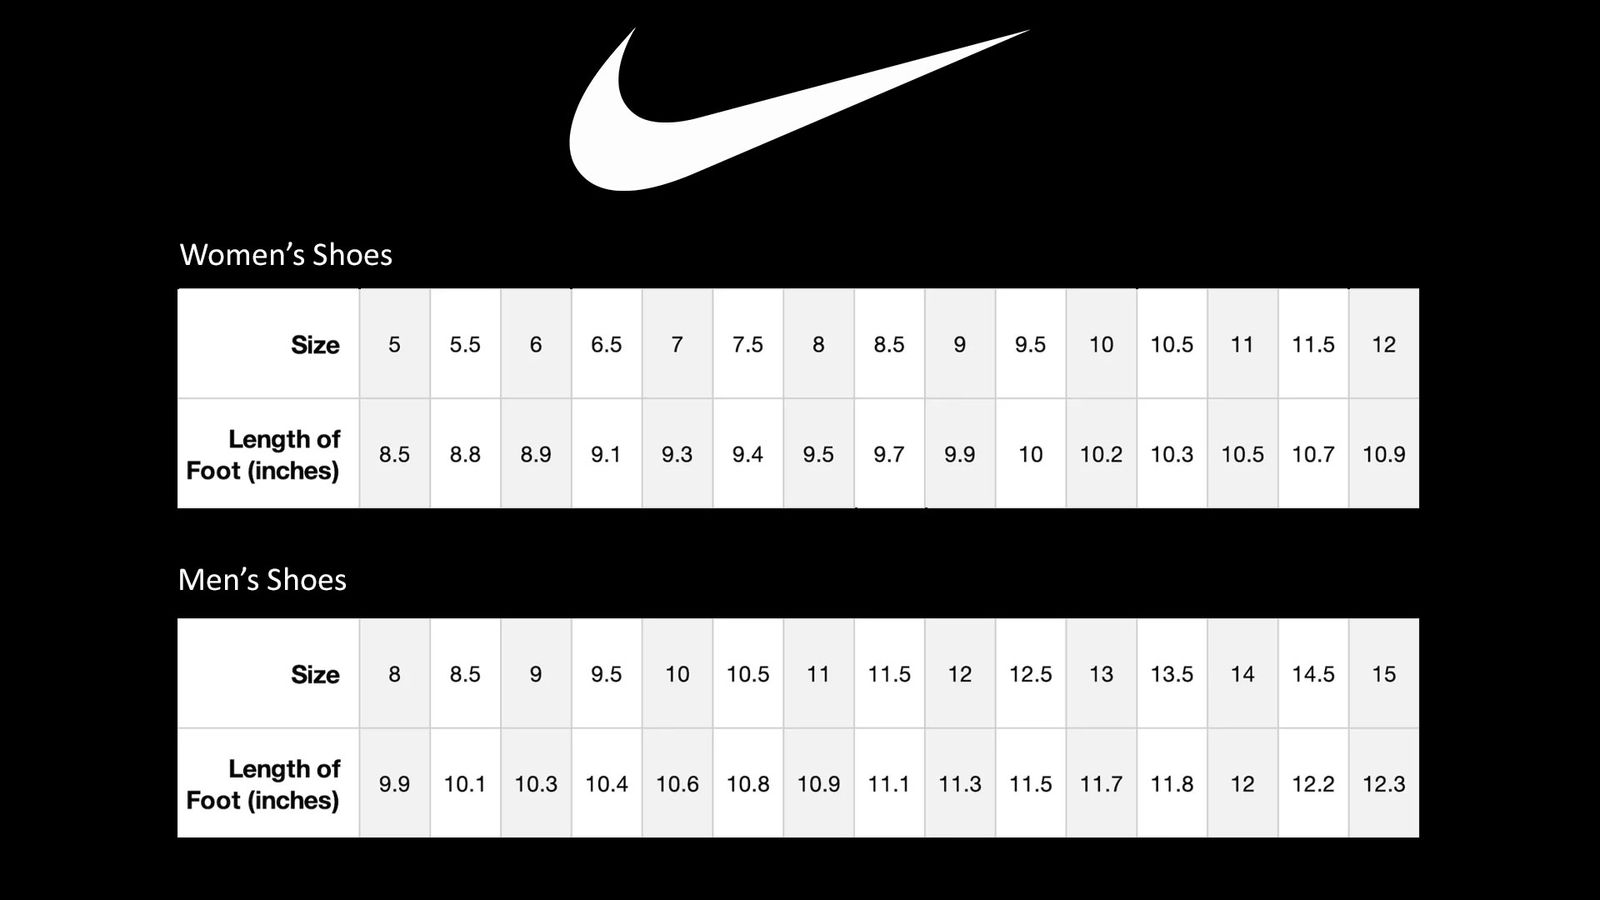 Nike vs Jordan Sizing: How do the shoes compare?